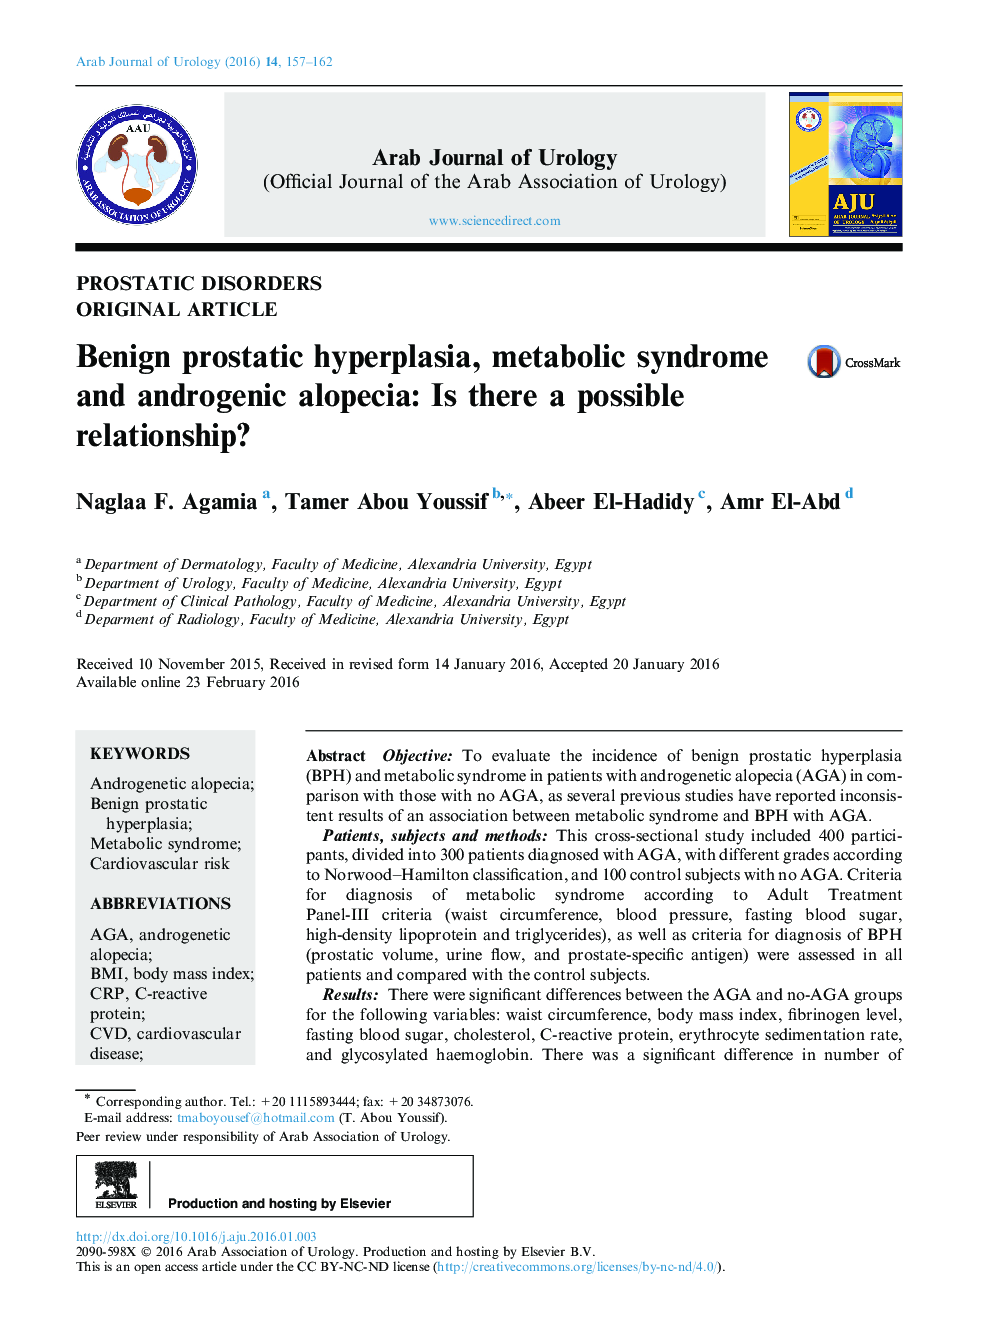 Benign prostatic hyperplasia, metabolic syndrome and androgenic alopecia: Is there a possible relationship? 